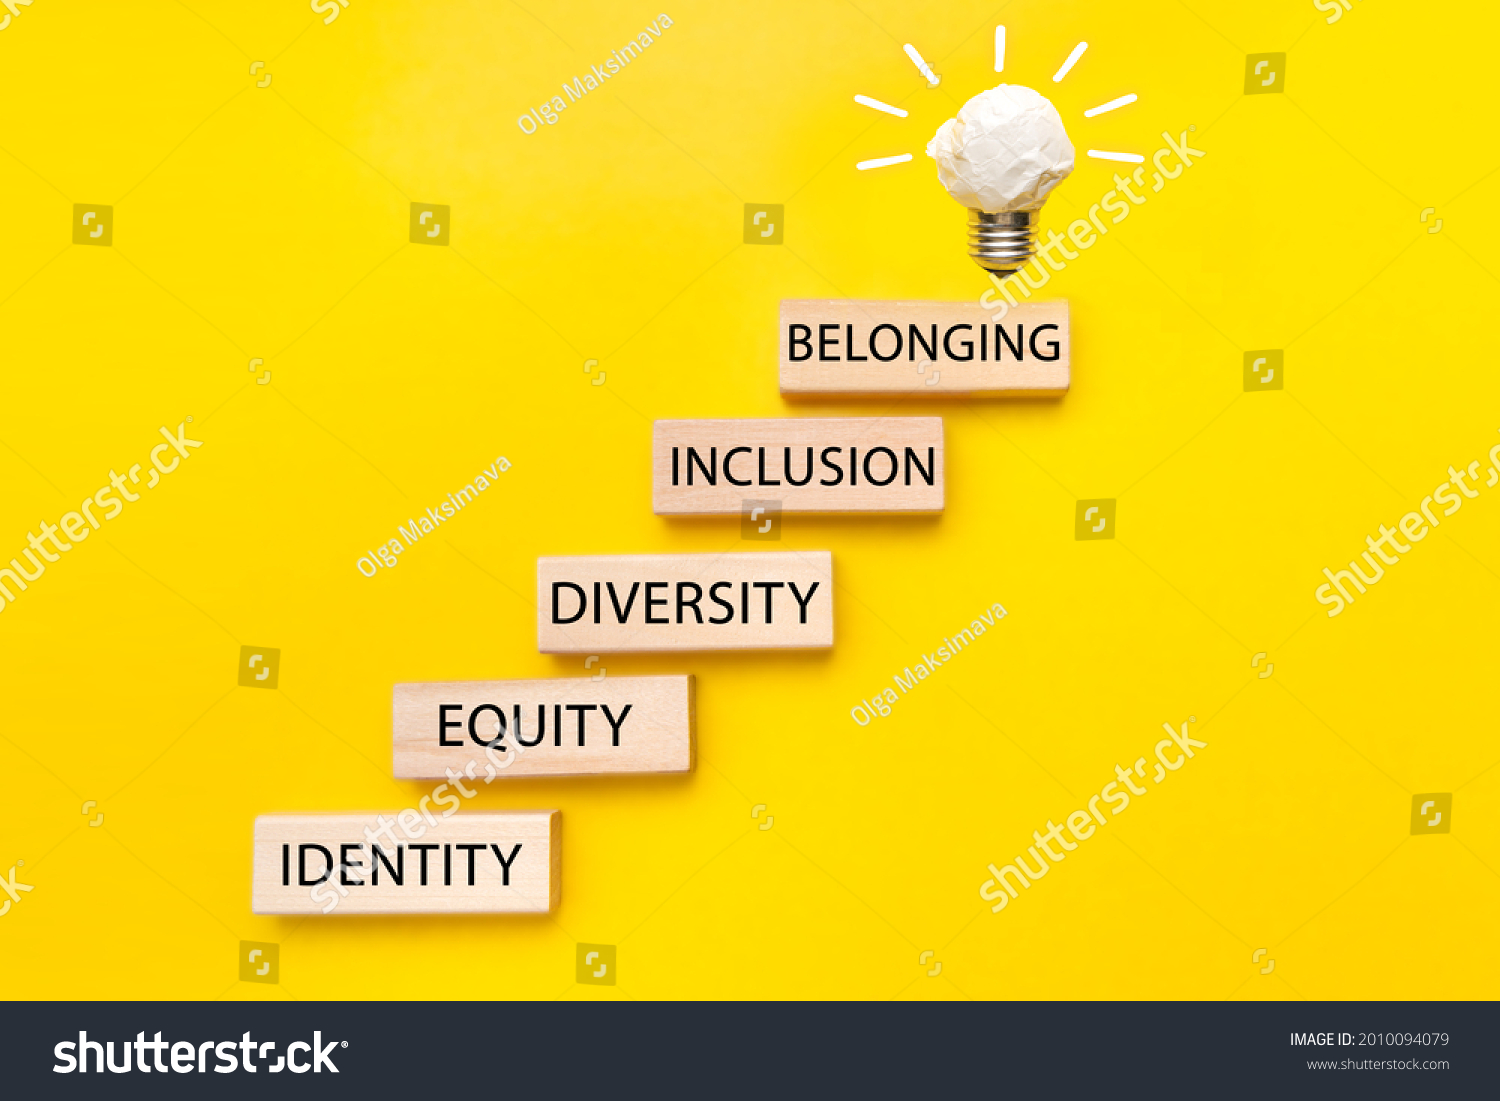 Equity, identity, diversity, inclusion, belonging symbol. Wooden blocks with words on beautiful yellow background. Inclusion, belonging concept. #2010094079